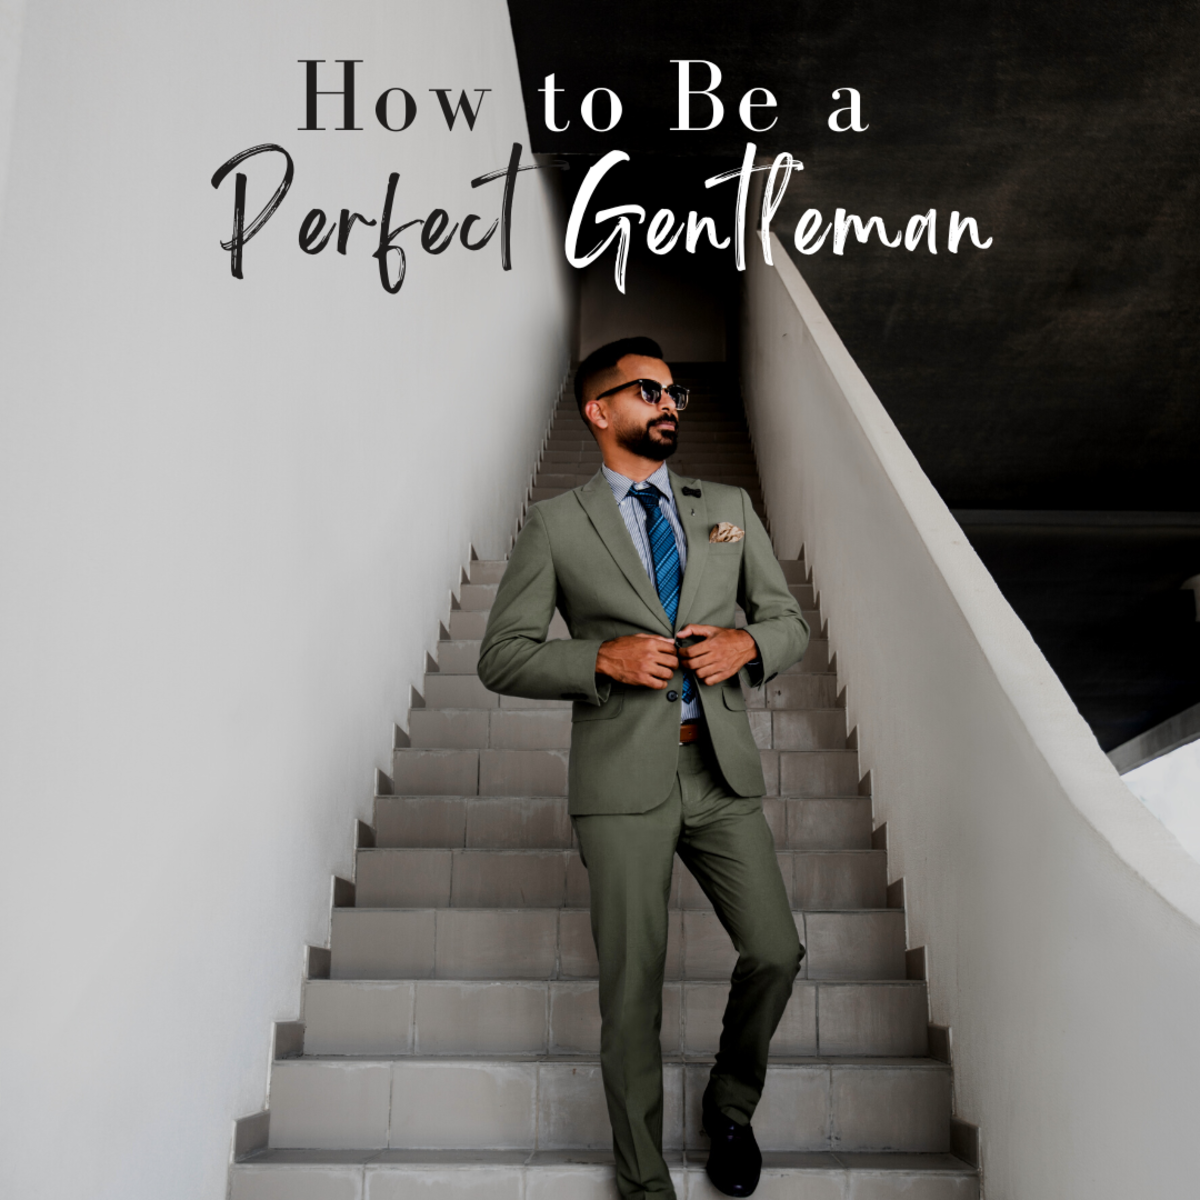 Learn how to impress your date by acting like a perfect gentleman!